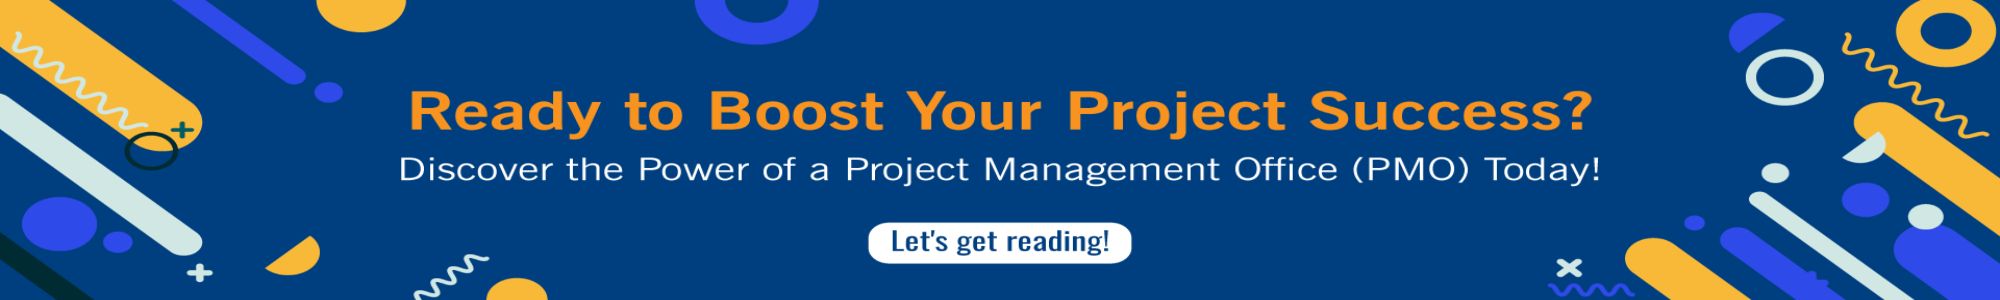 Discover the power of a project management office 